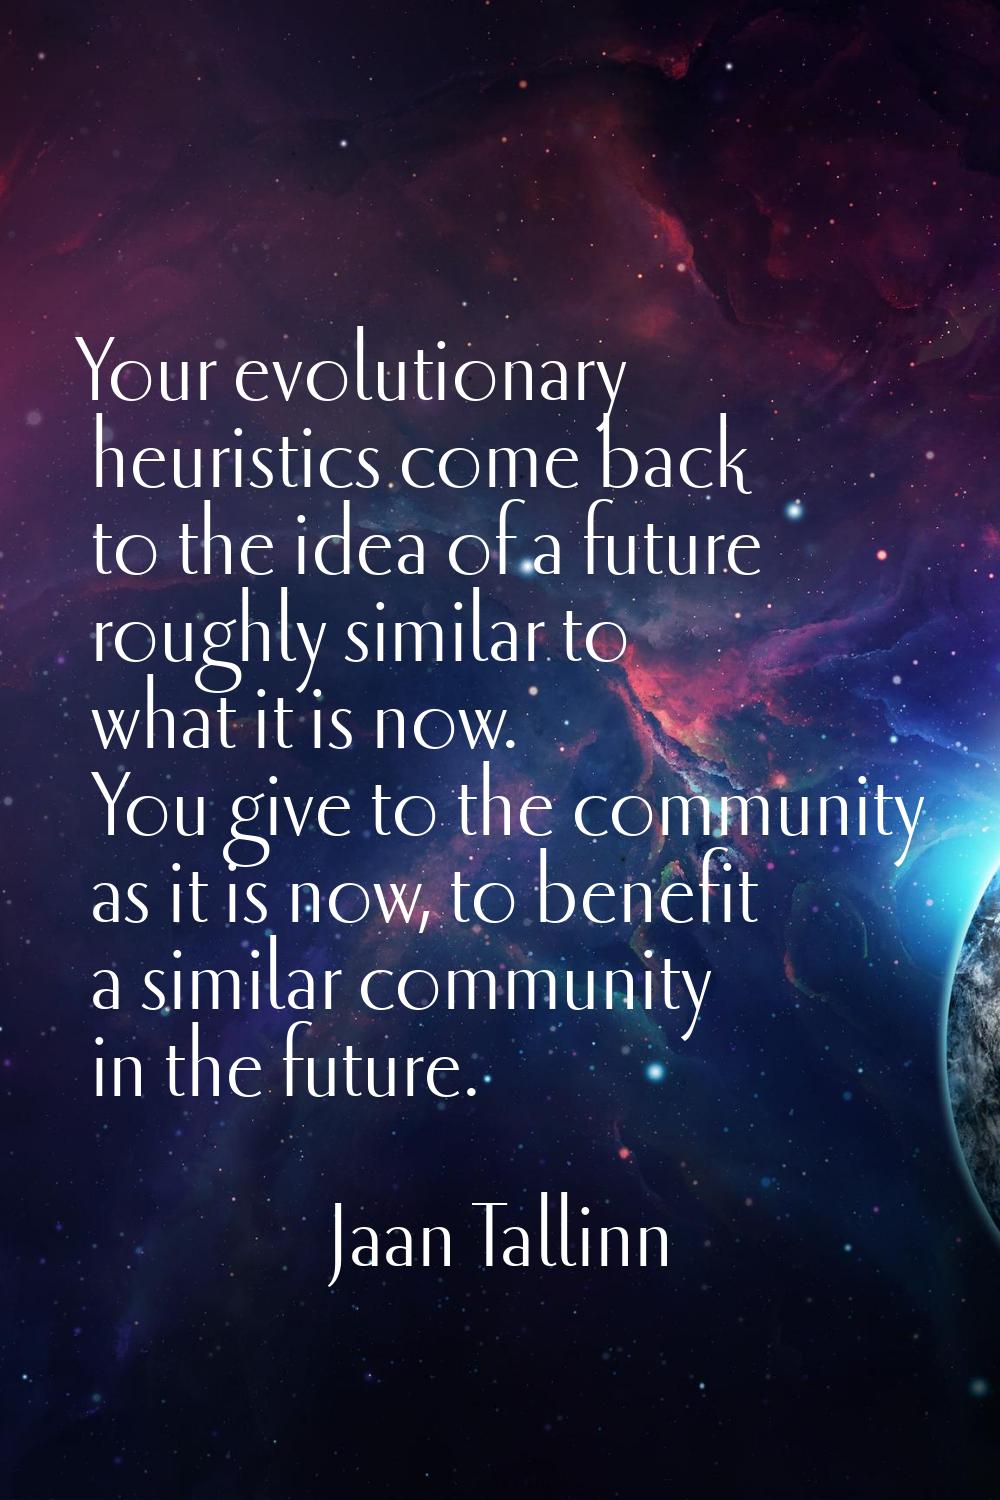 Your evolutionary heuristics come back to the idea of a future roughly similar to what it is now. Y